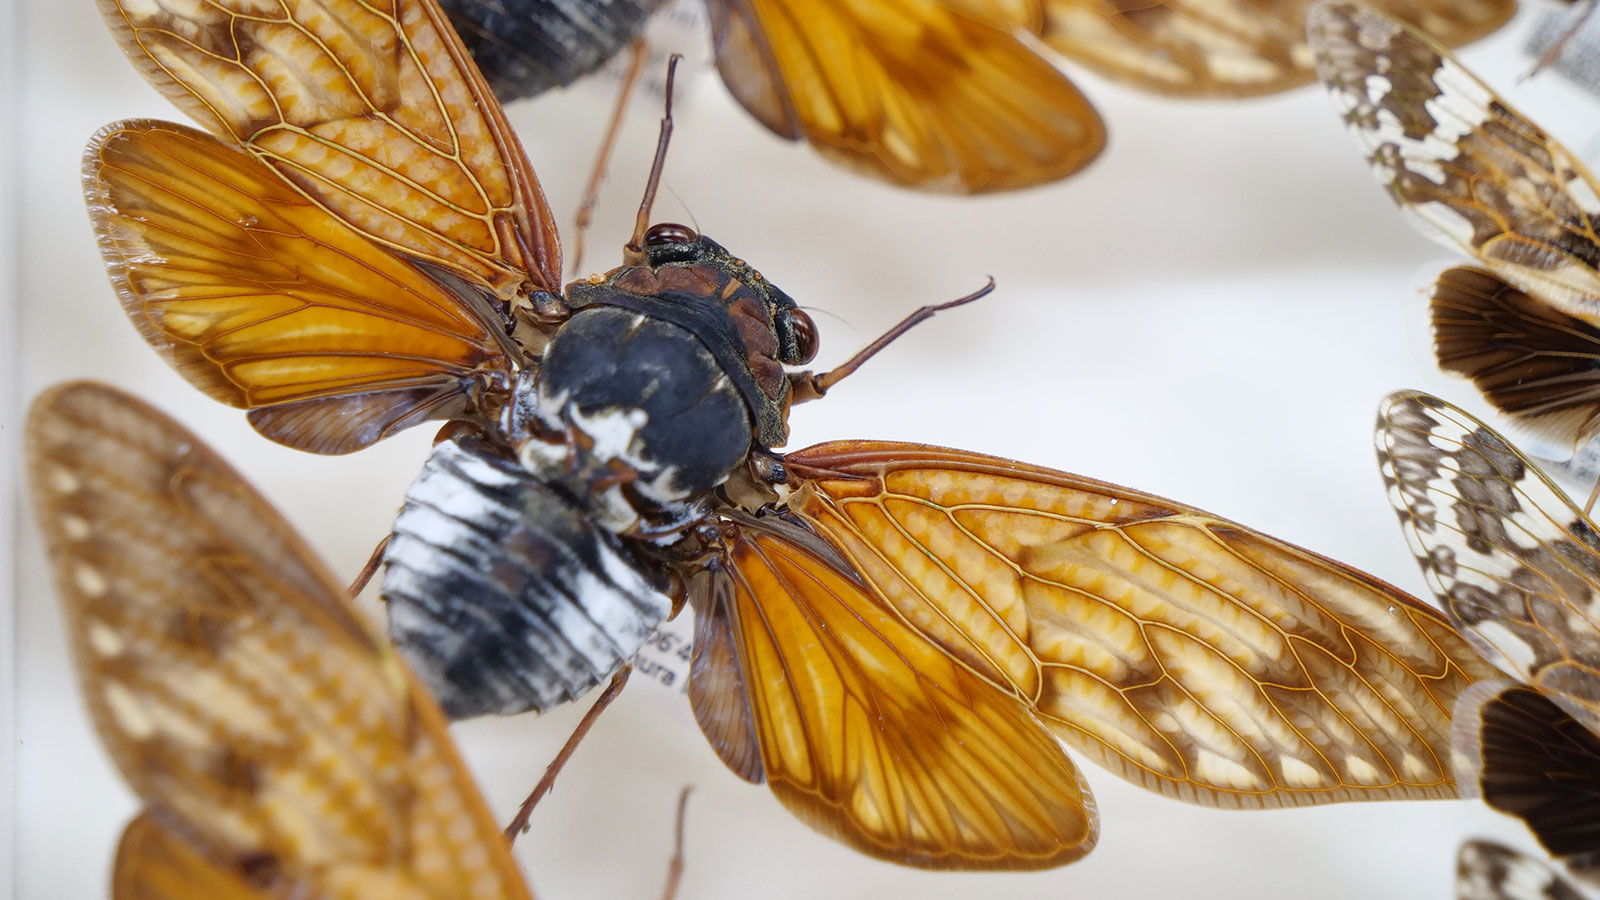 What s a Japanese summer without the noisy cicada? Deep reads from